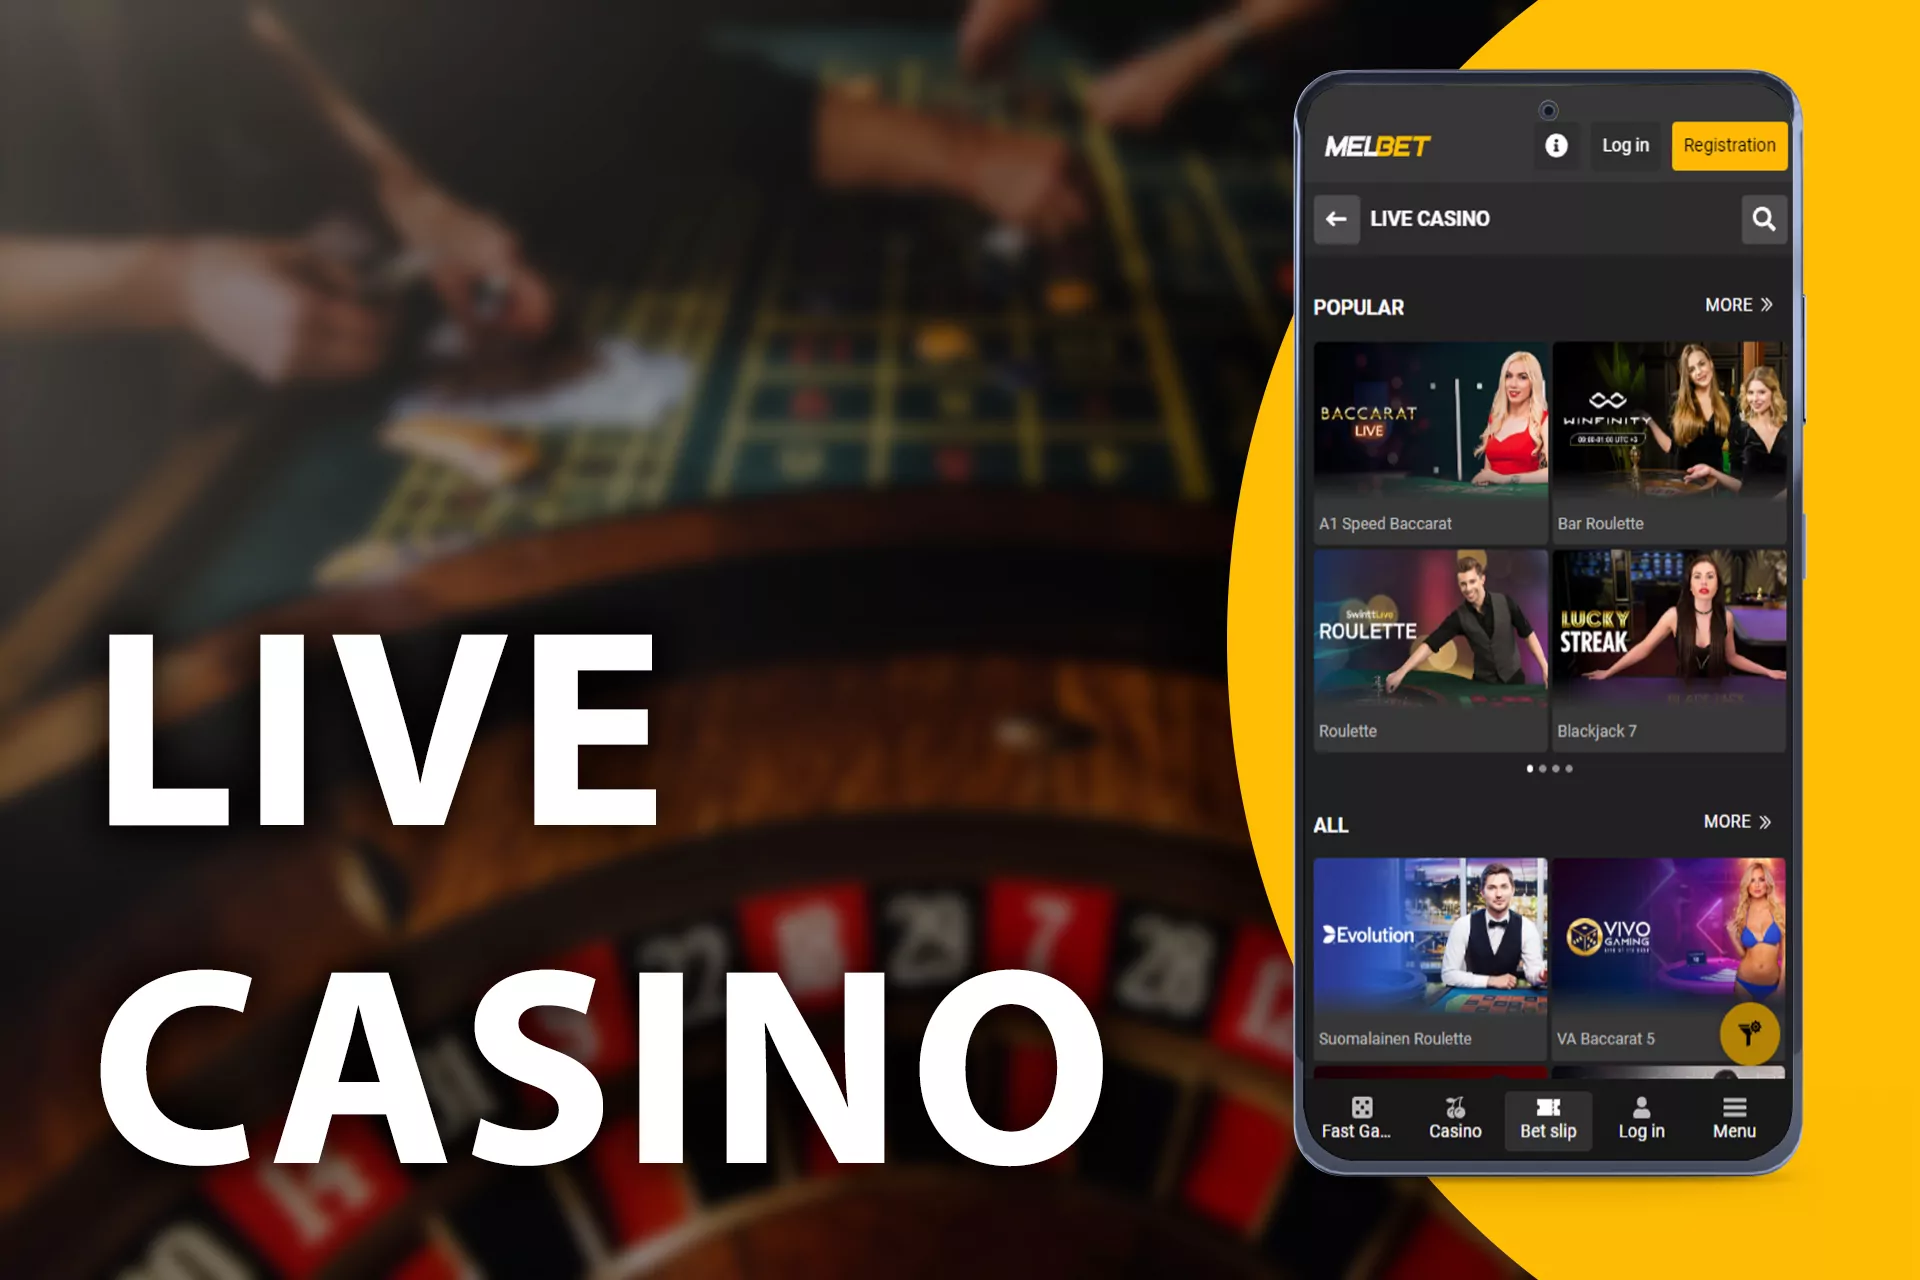 If you prefer games with a real dealer try the Live Casino.